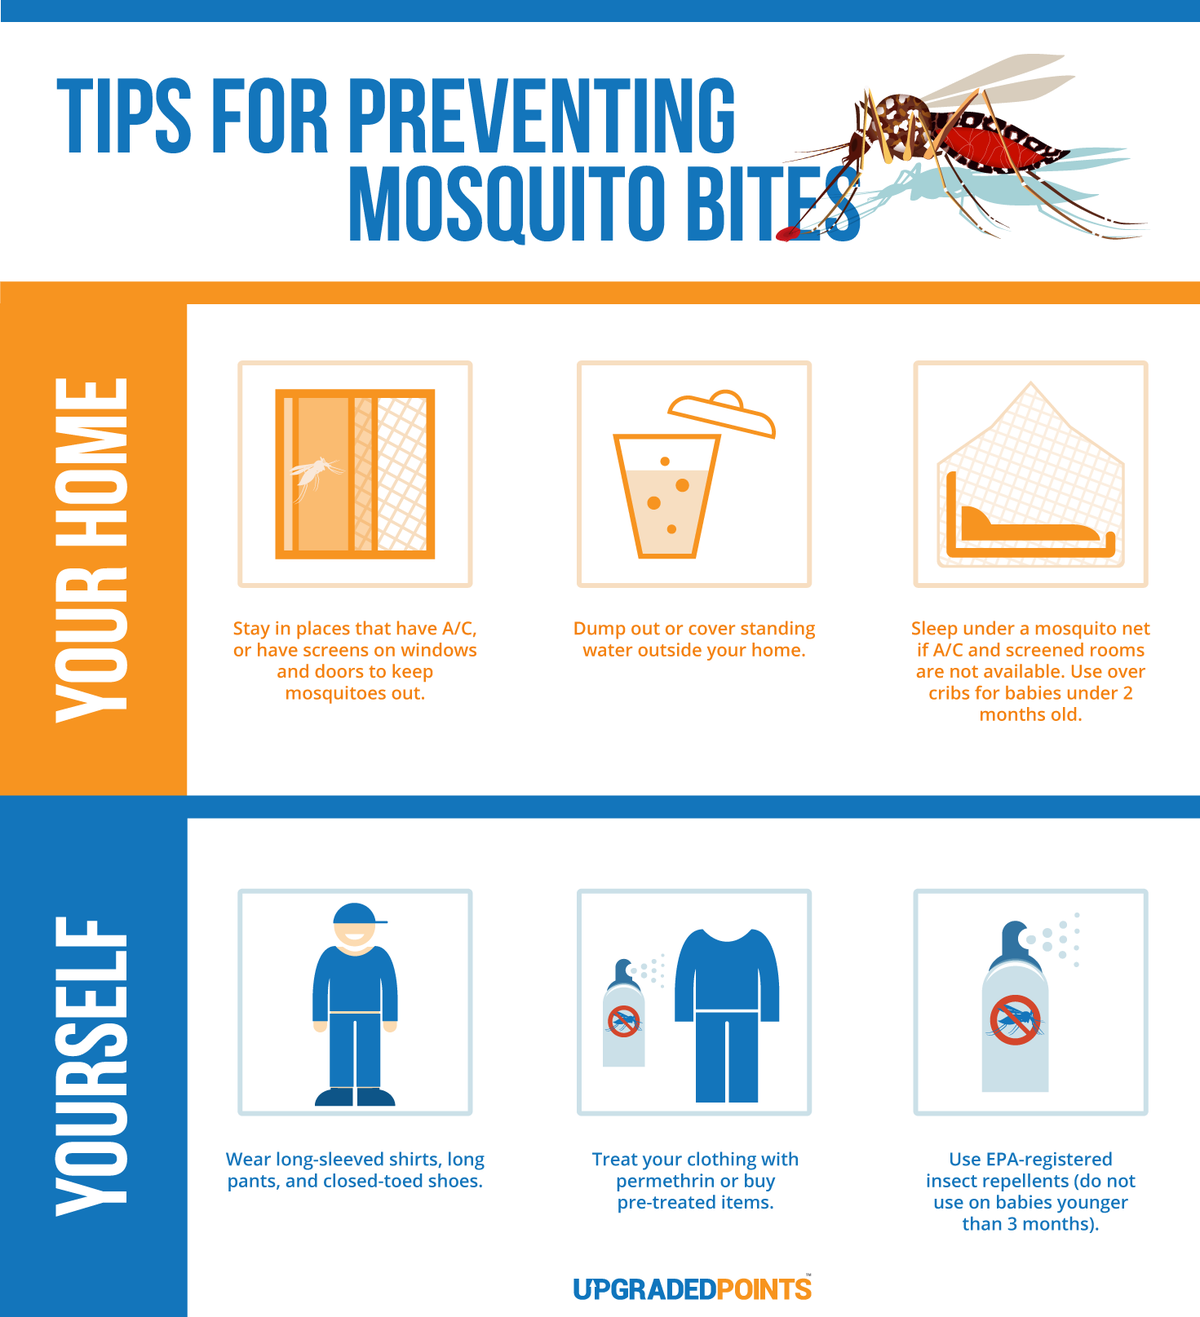 Tips for Preventing Mosquito Bites